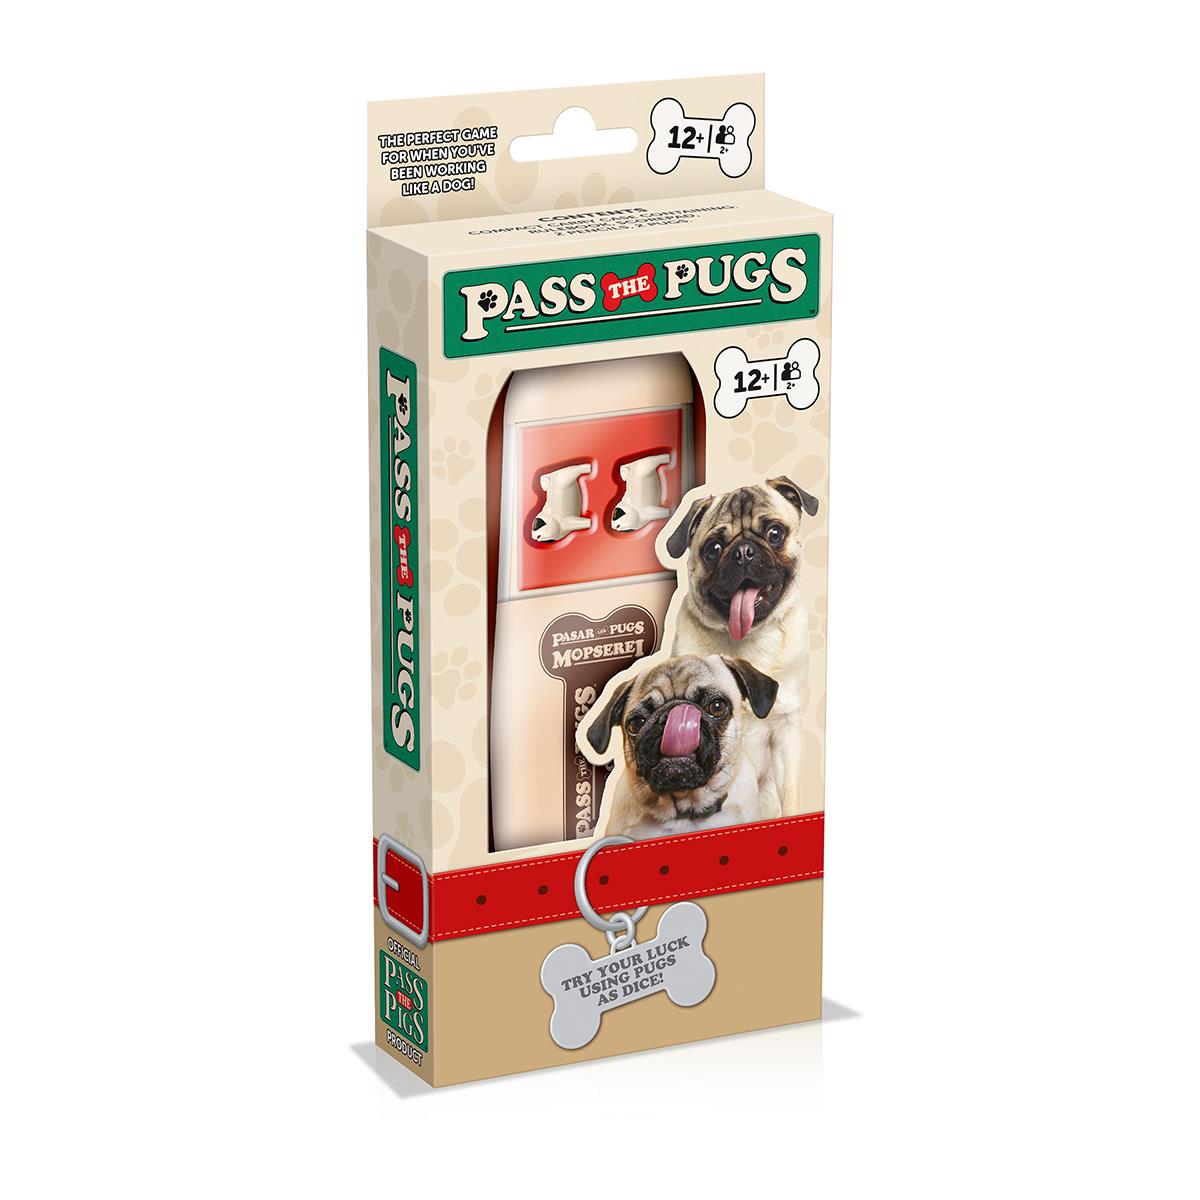 Pass the Pugs Dice Game